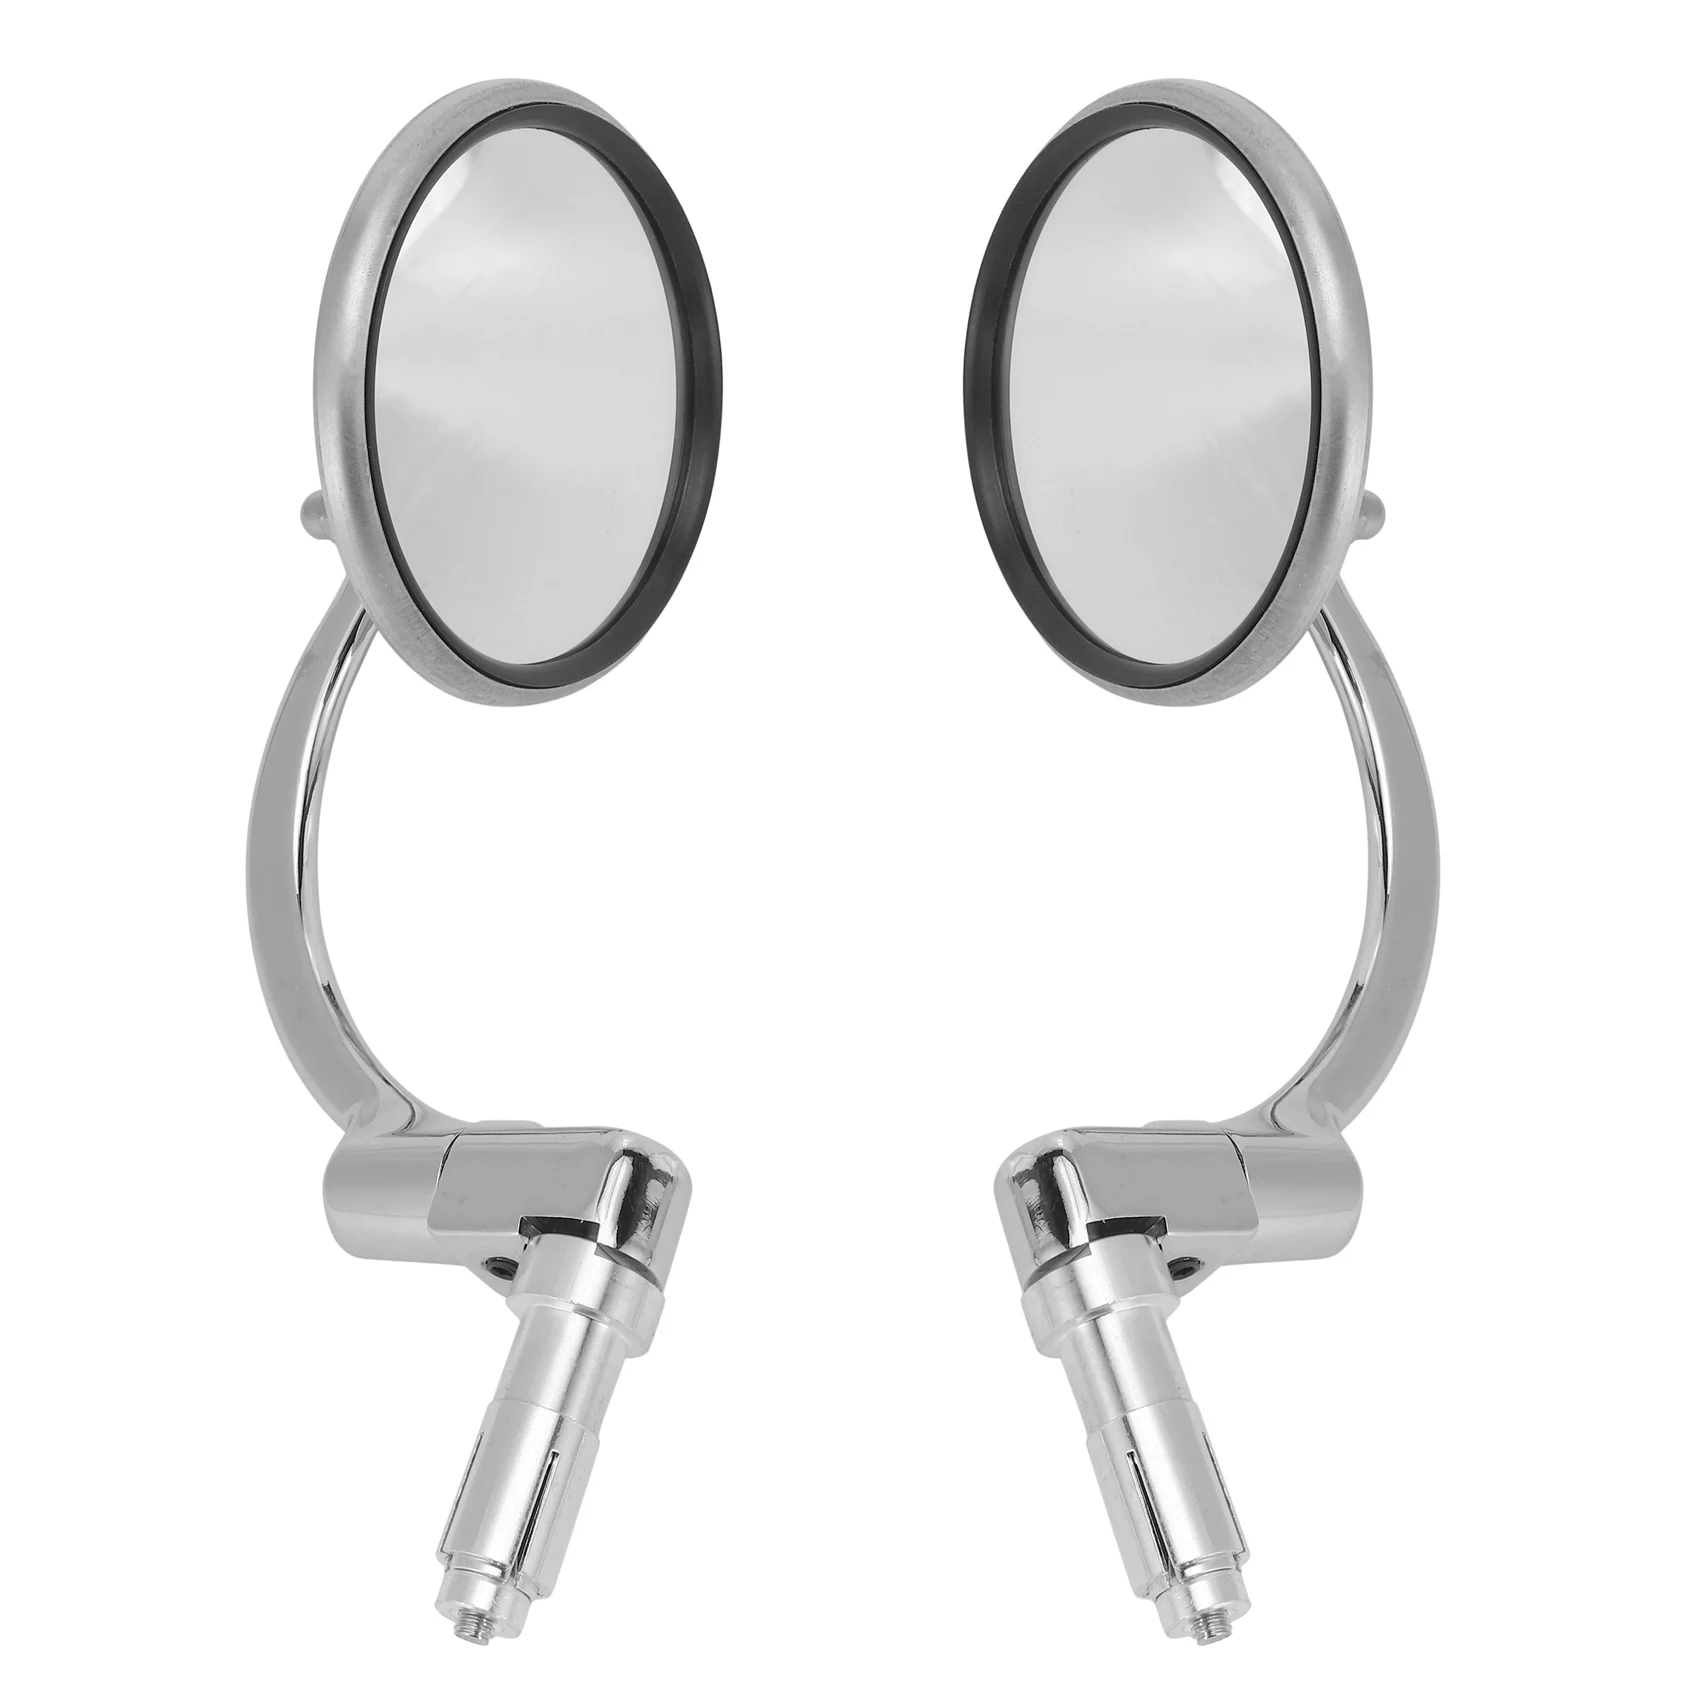 

2 Pcs Universal Chrome Round Rearview Mirrors Bar End Side Mirrors for Motorcycle Chopper Scooter Cafe Racer